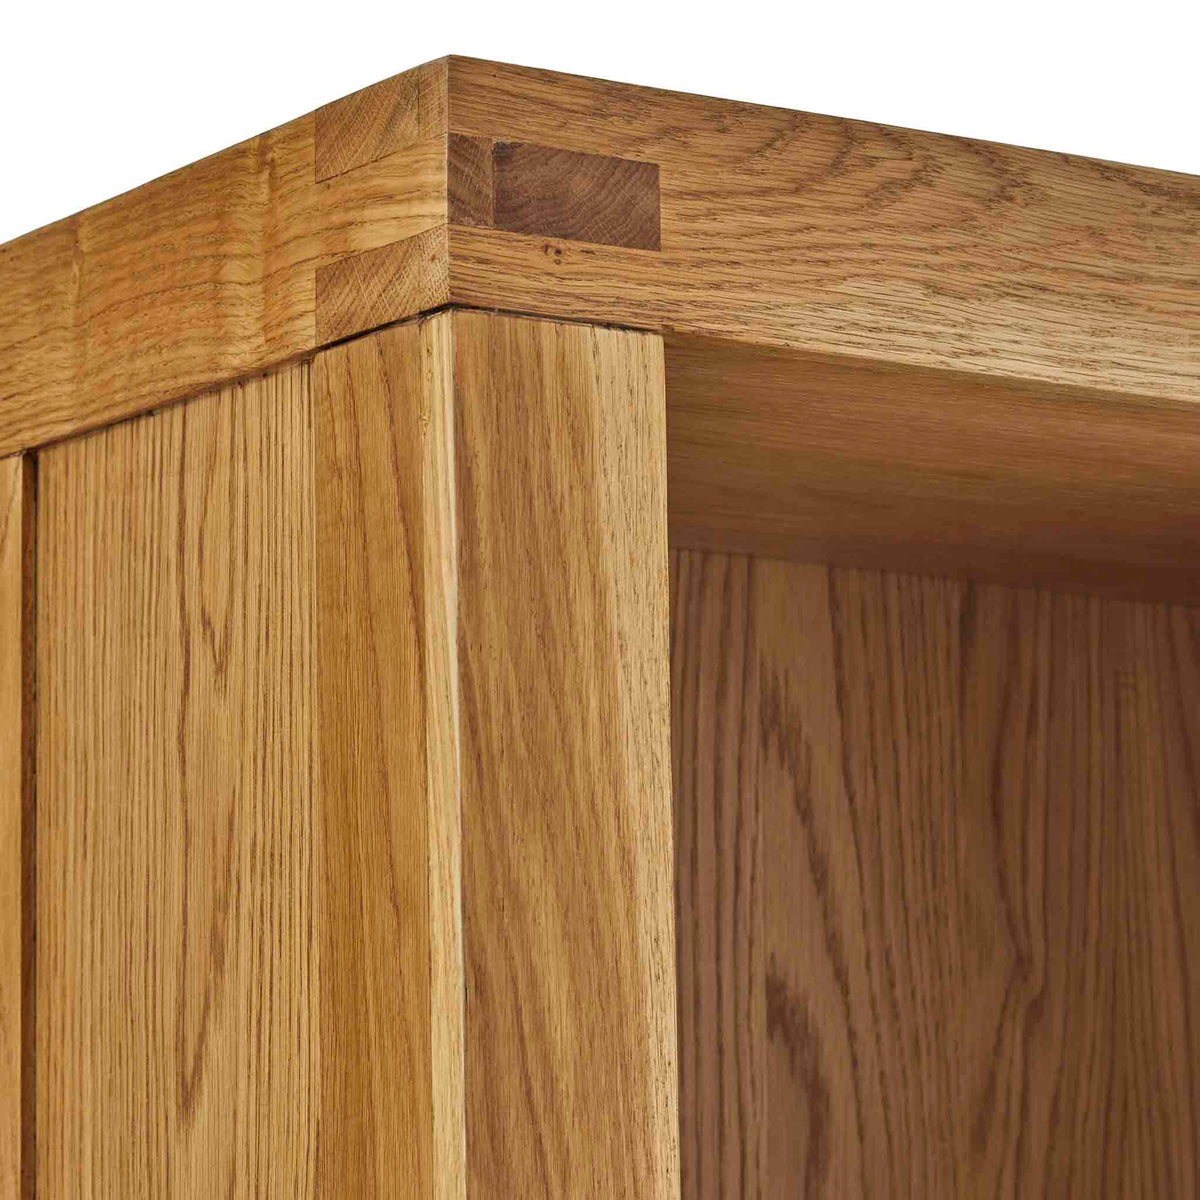  Abbey Grande Tall Narrow Oak Bookcase - Close up of tenon joint at top of bookcase